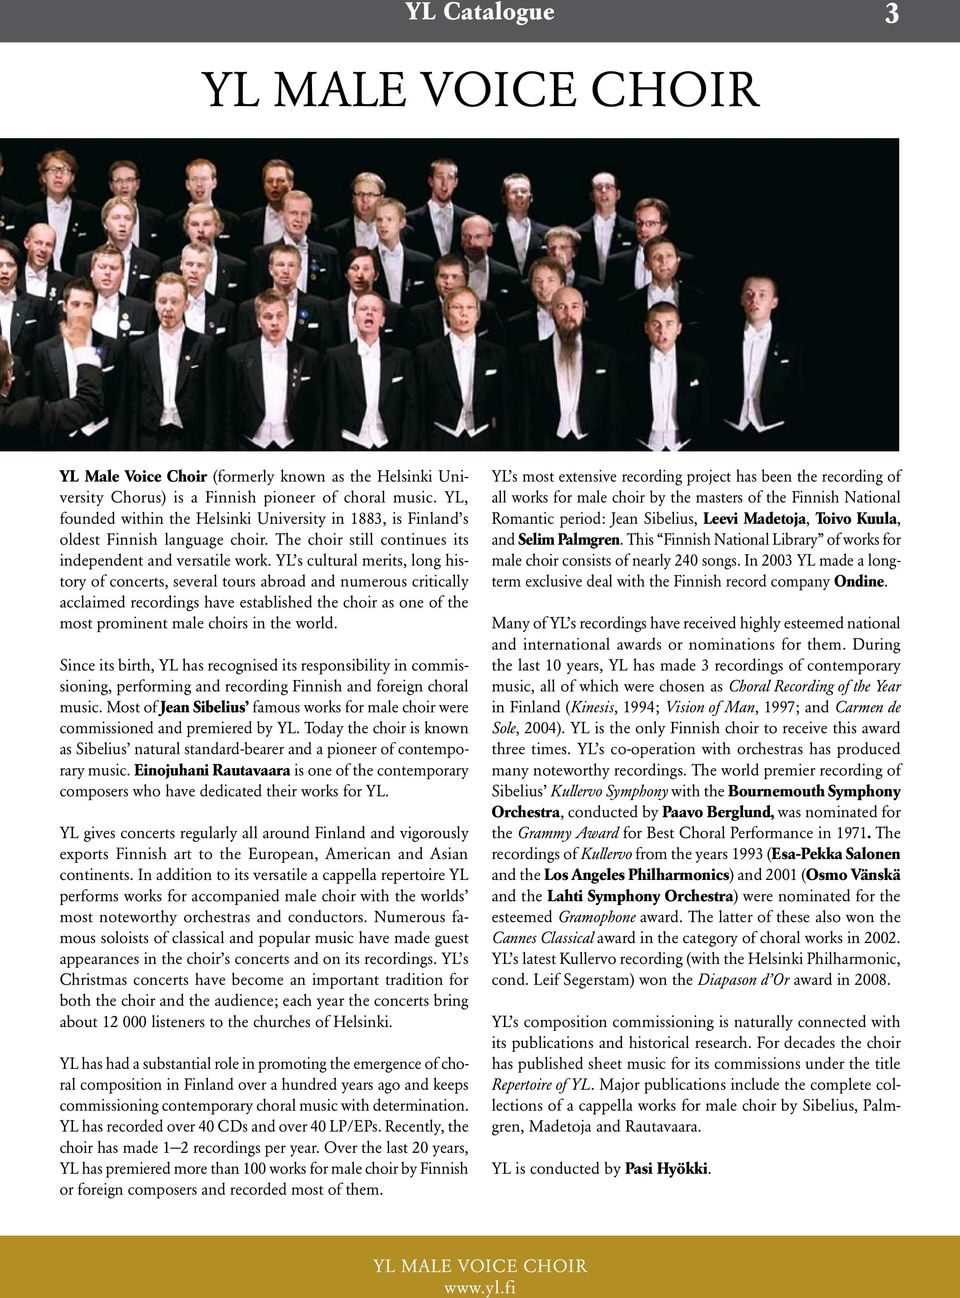 YL s cultural merits, long history of concerts, several tours abroad and numerous critically acclaimed recordings have established the choir as one of the most prominent male choirs in the world.